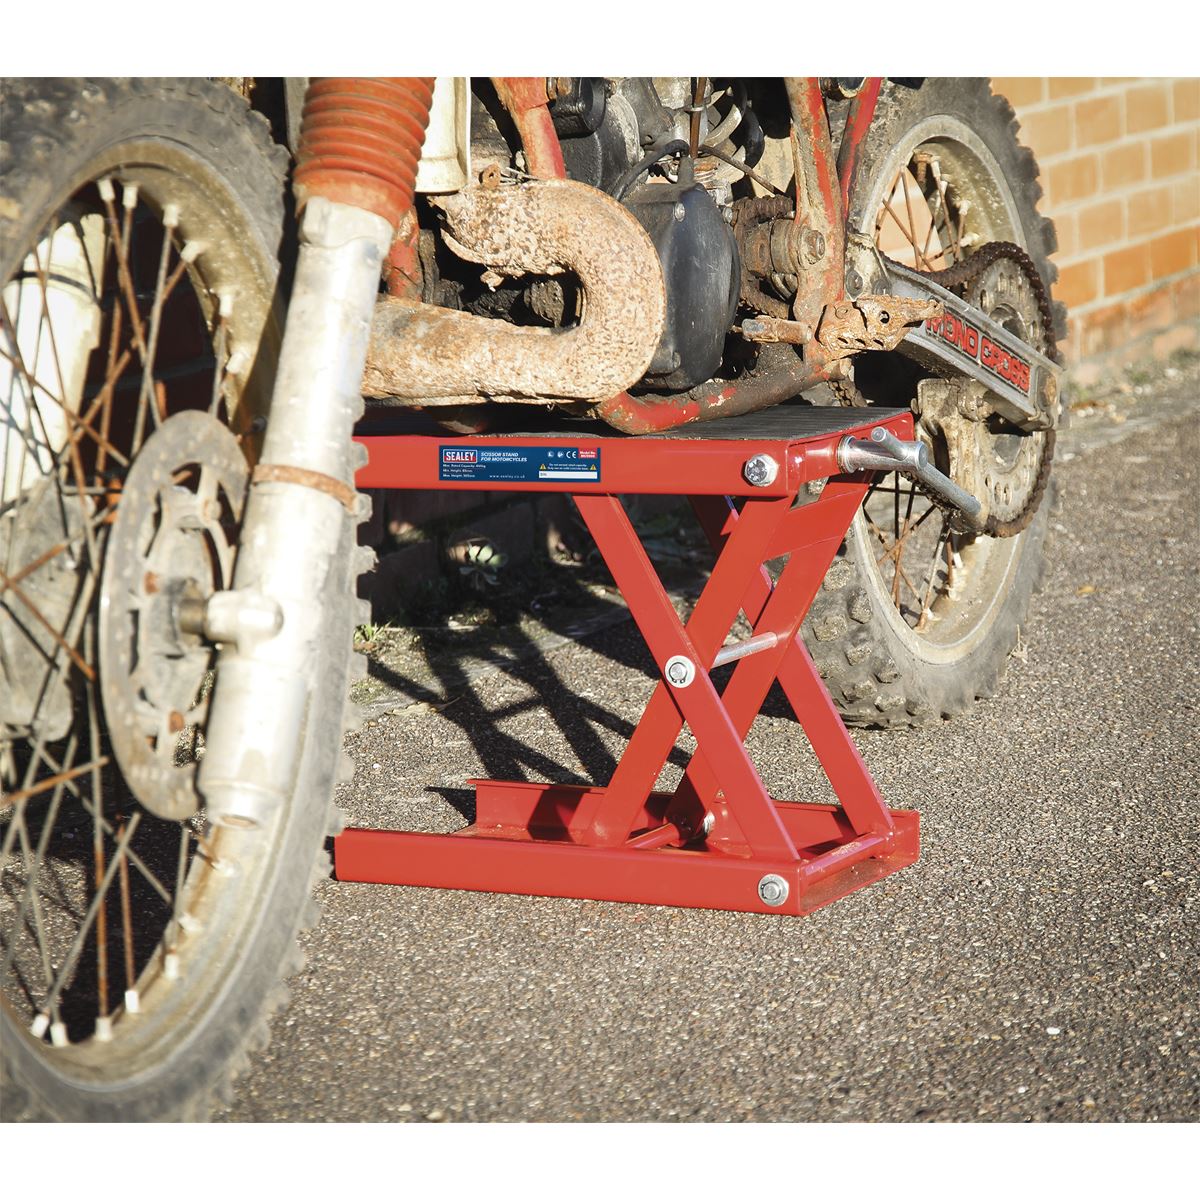 Sealey Scissor Stand for Motorcycles 450kg